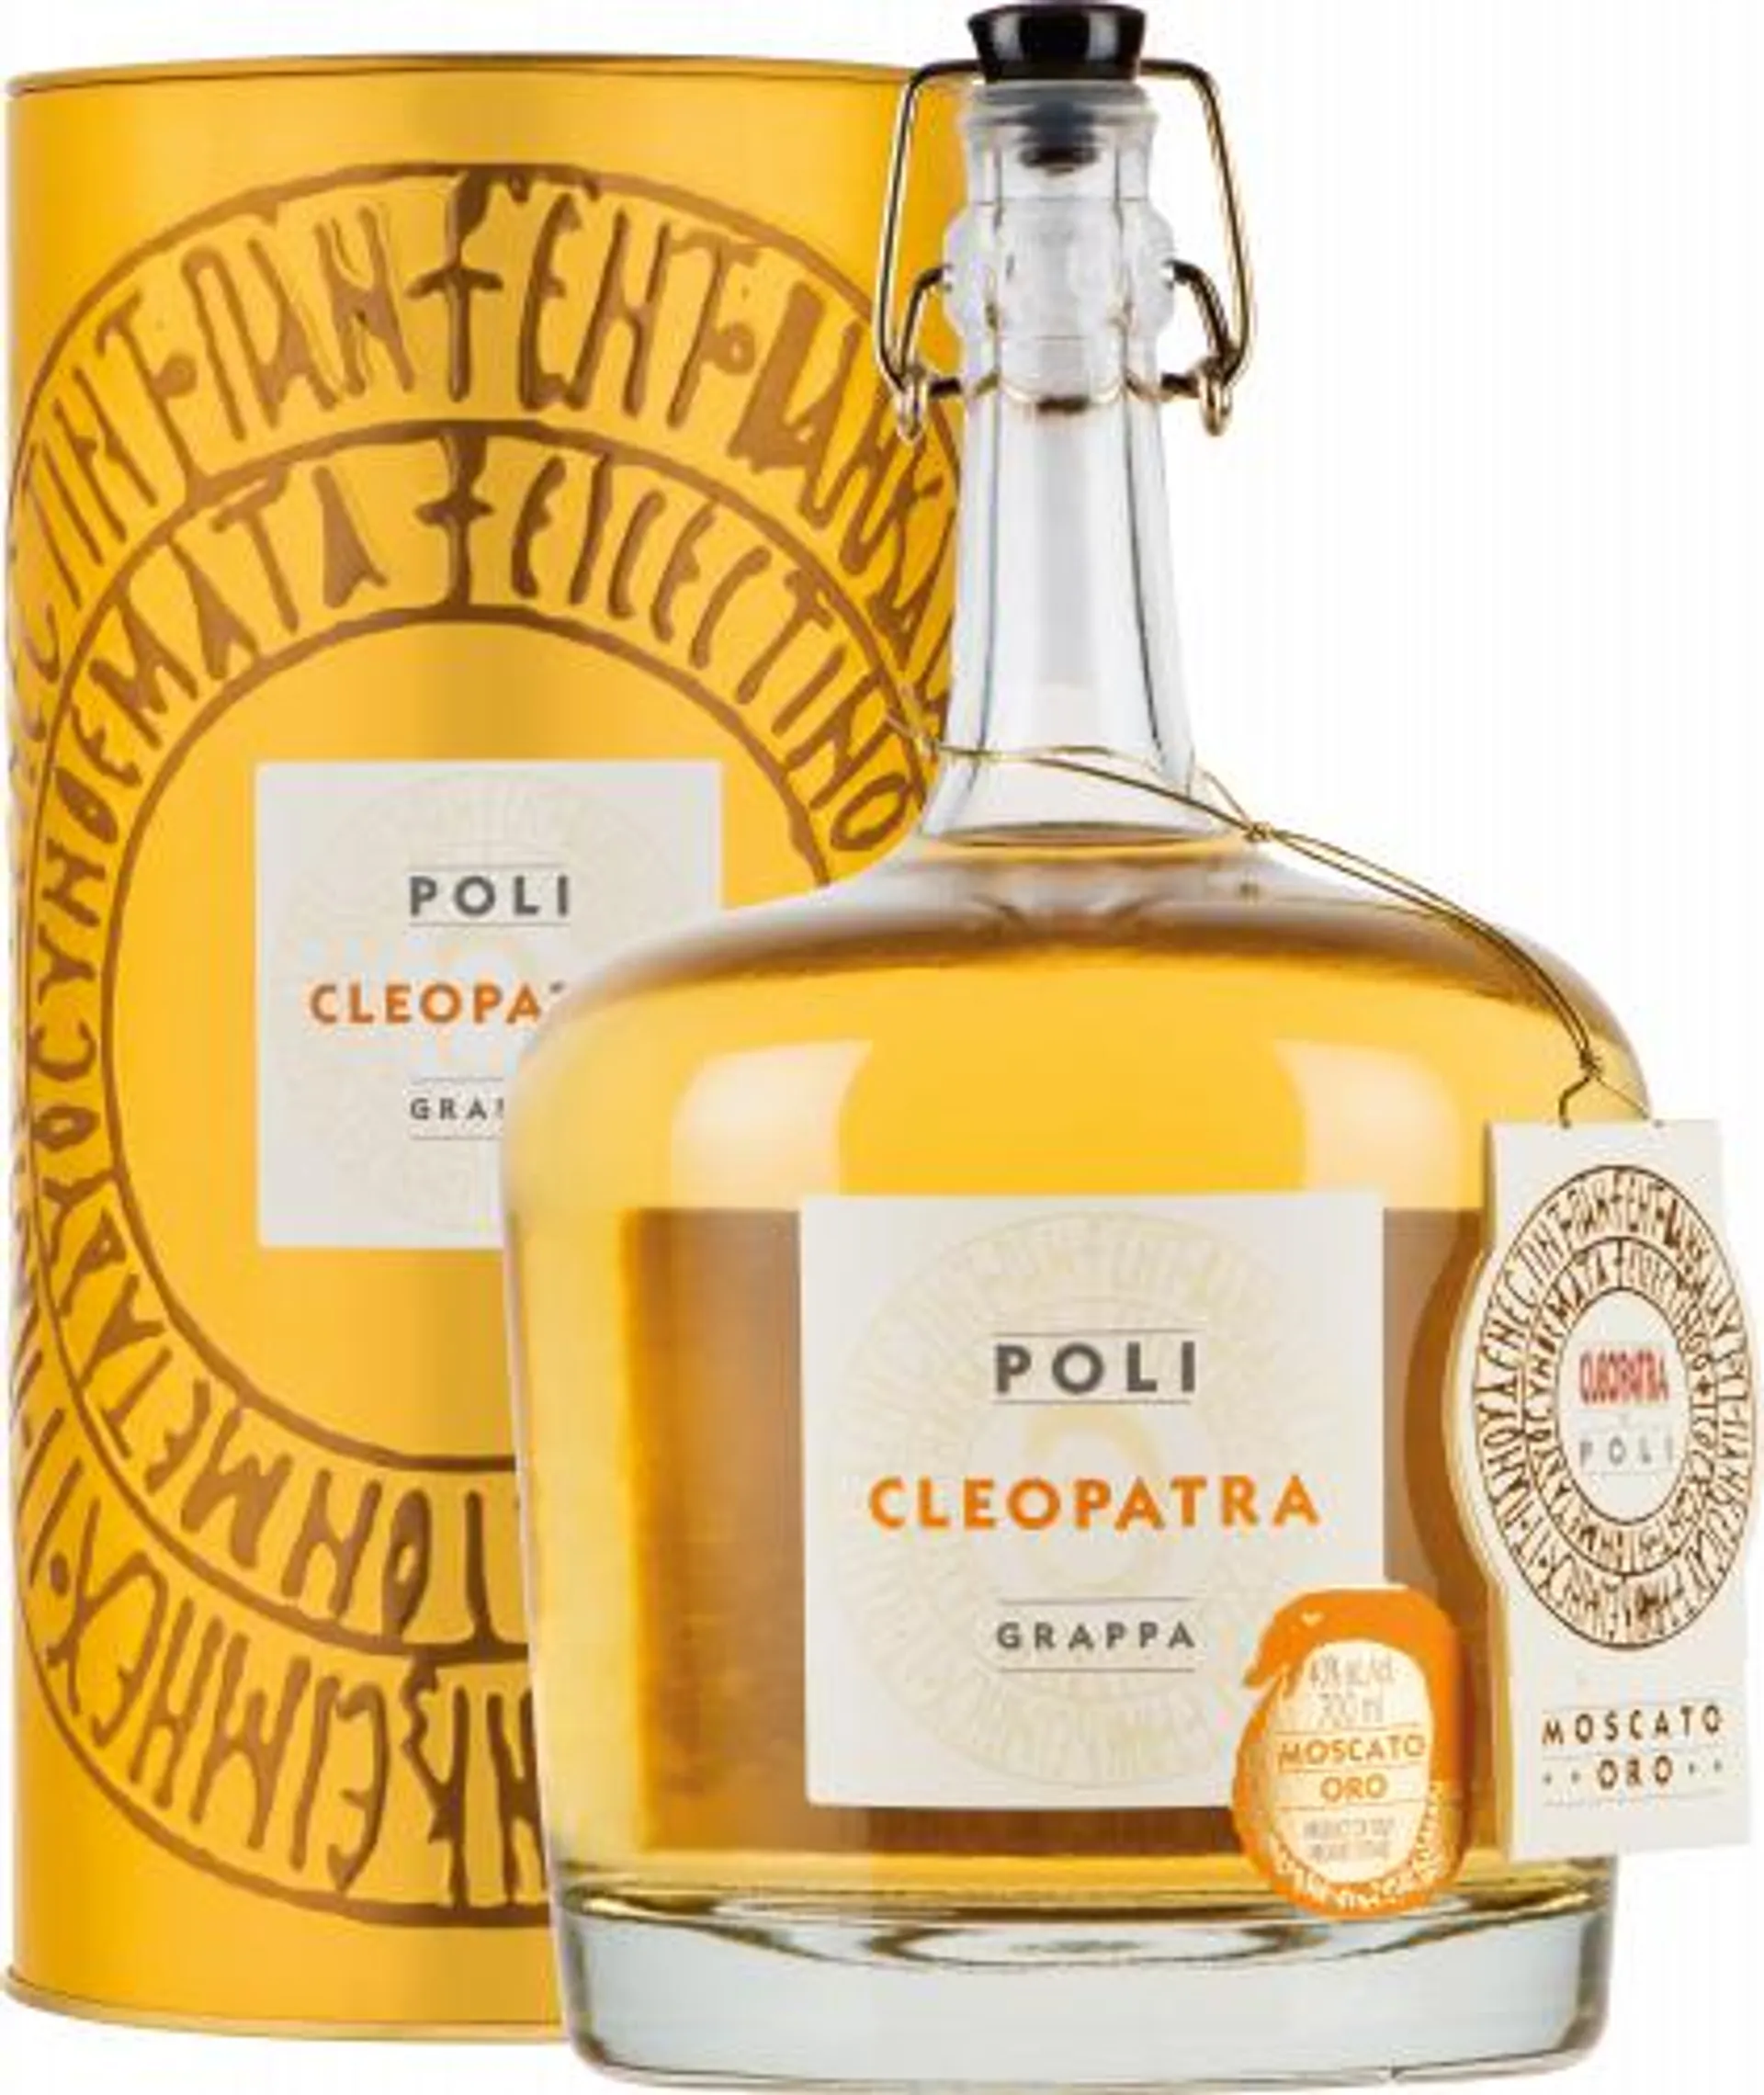 Grappa Cleopatra Moscato d’Oro 0,7 Liter in Tube